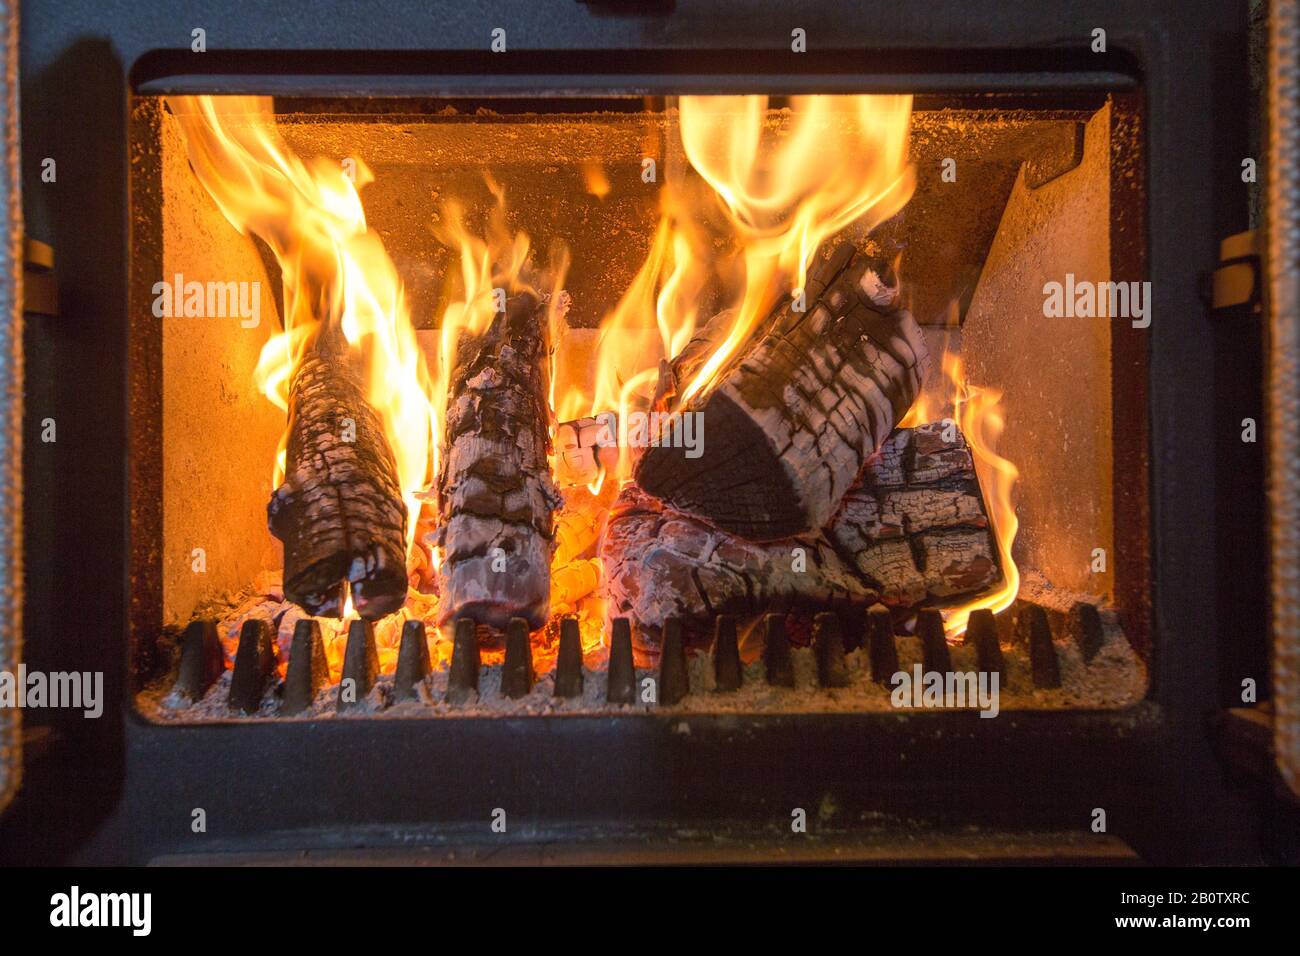 Piicture shows wood on fire in a wood burning stove.   Owners of wood burners, stoves and open fires will no longer be able to buy coal or wet wood to burn in them, under a ban to be rolled out from next year. Sales of the two most polluting fuels will be phased out in England to help cut air pollution, the government says. Bags of logs sold in DIY stores, garden centres and petrol stations often contain wet wood - a type of wood which produces more pollution and smoke. The public should move to 'cleaner alternatives', the government says. Stock Photo